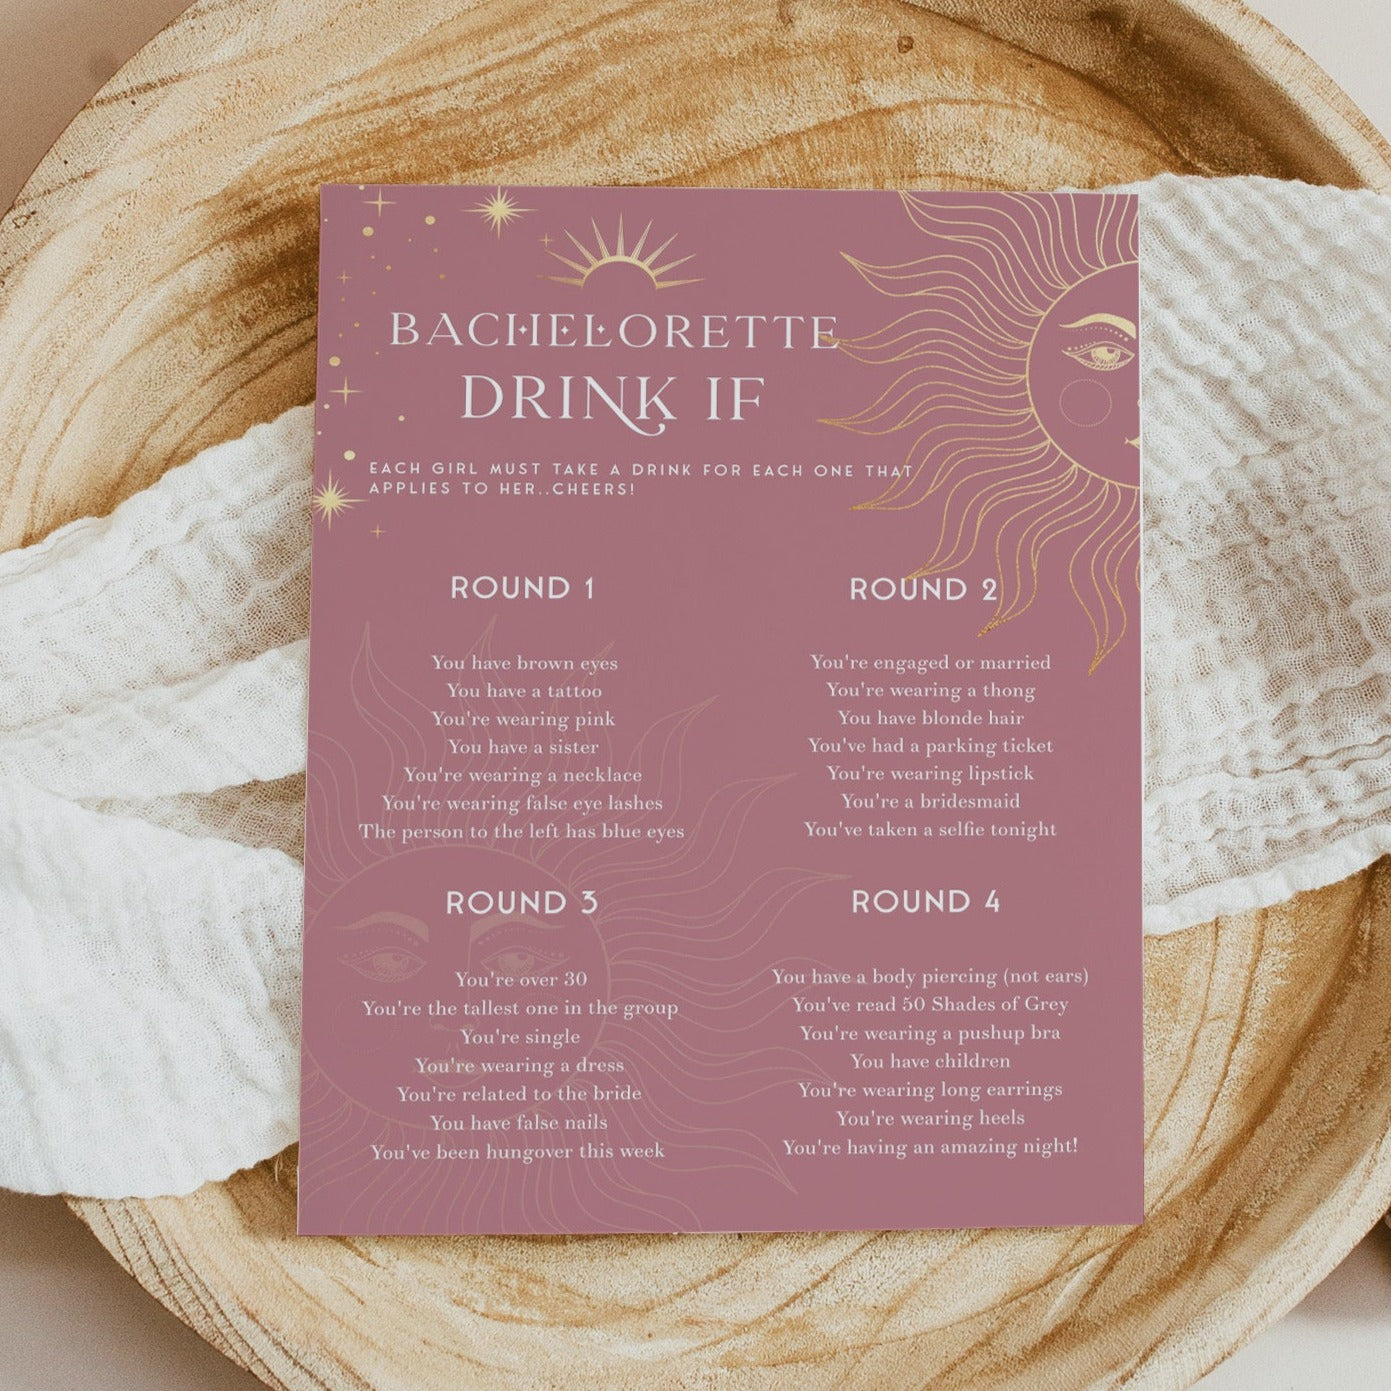 Fully editable and printable bachelorette drink if game with a celestial design. Perfect for a celestial bridal shower themed party